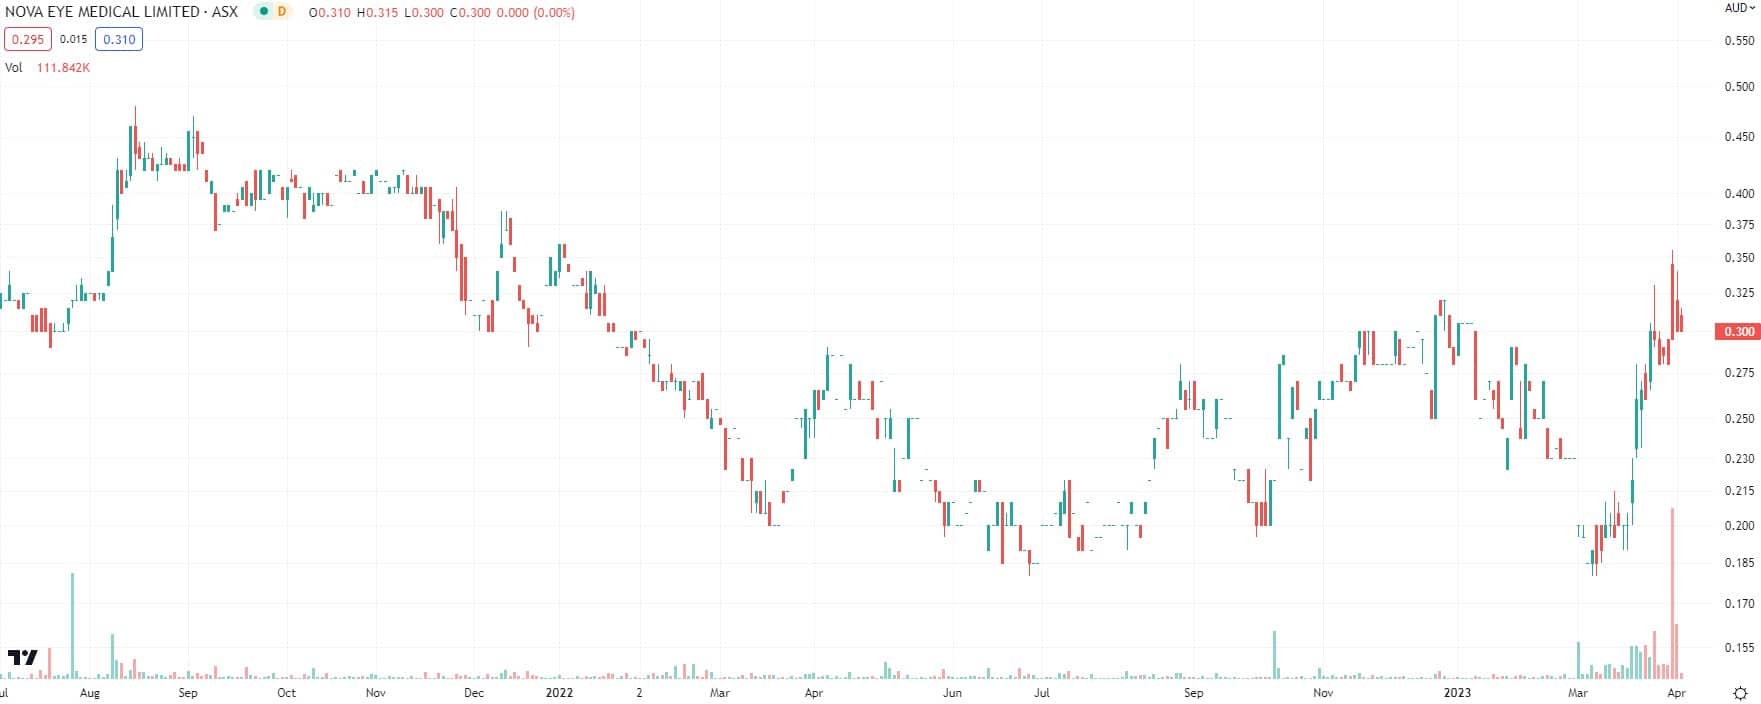 Nova Eye Medical (ASX:EYE) has been on a strong run, up 50% in one month. Is there more upside? 1